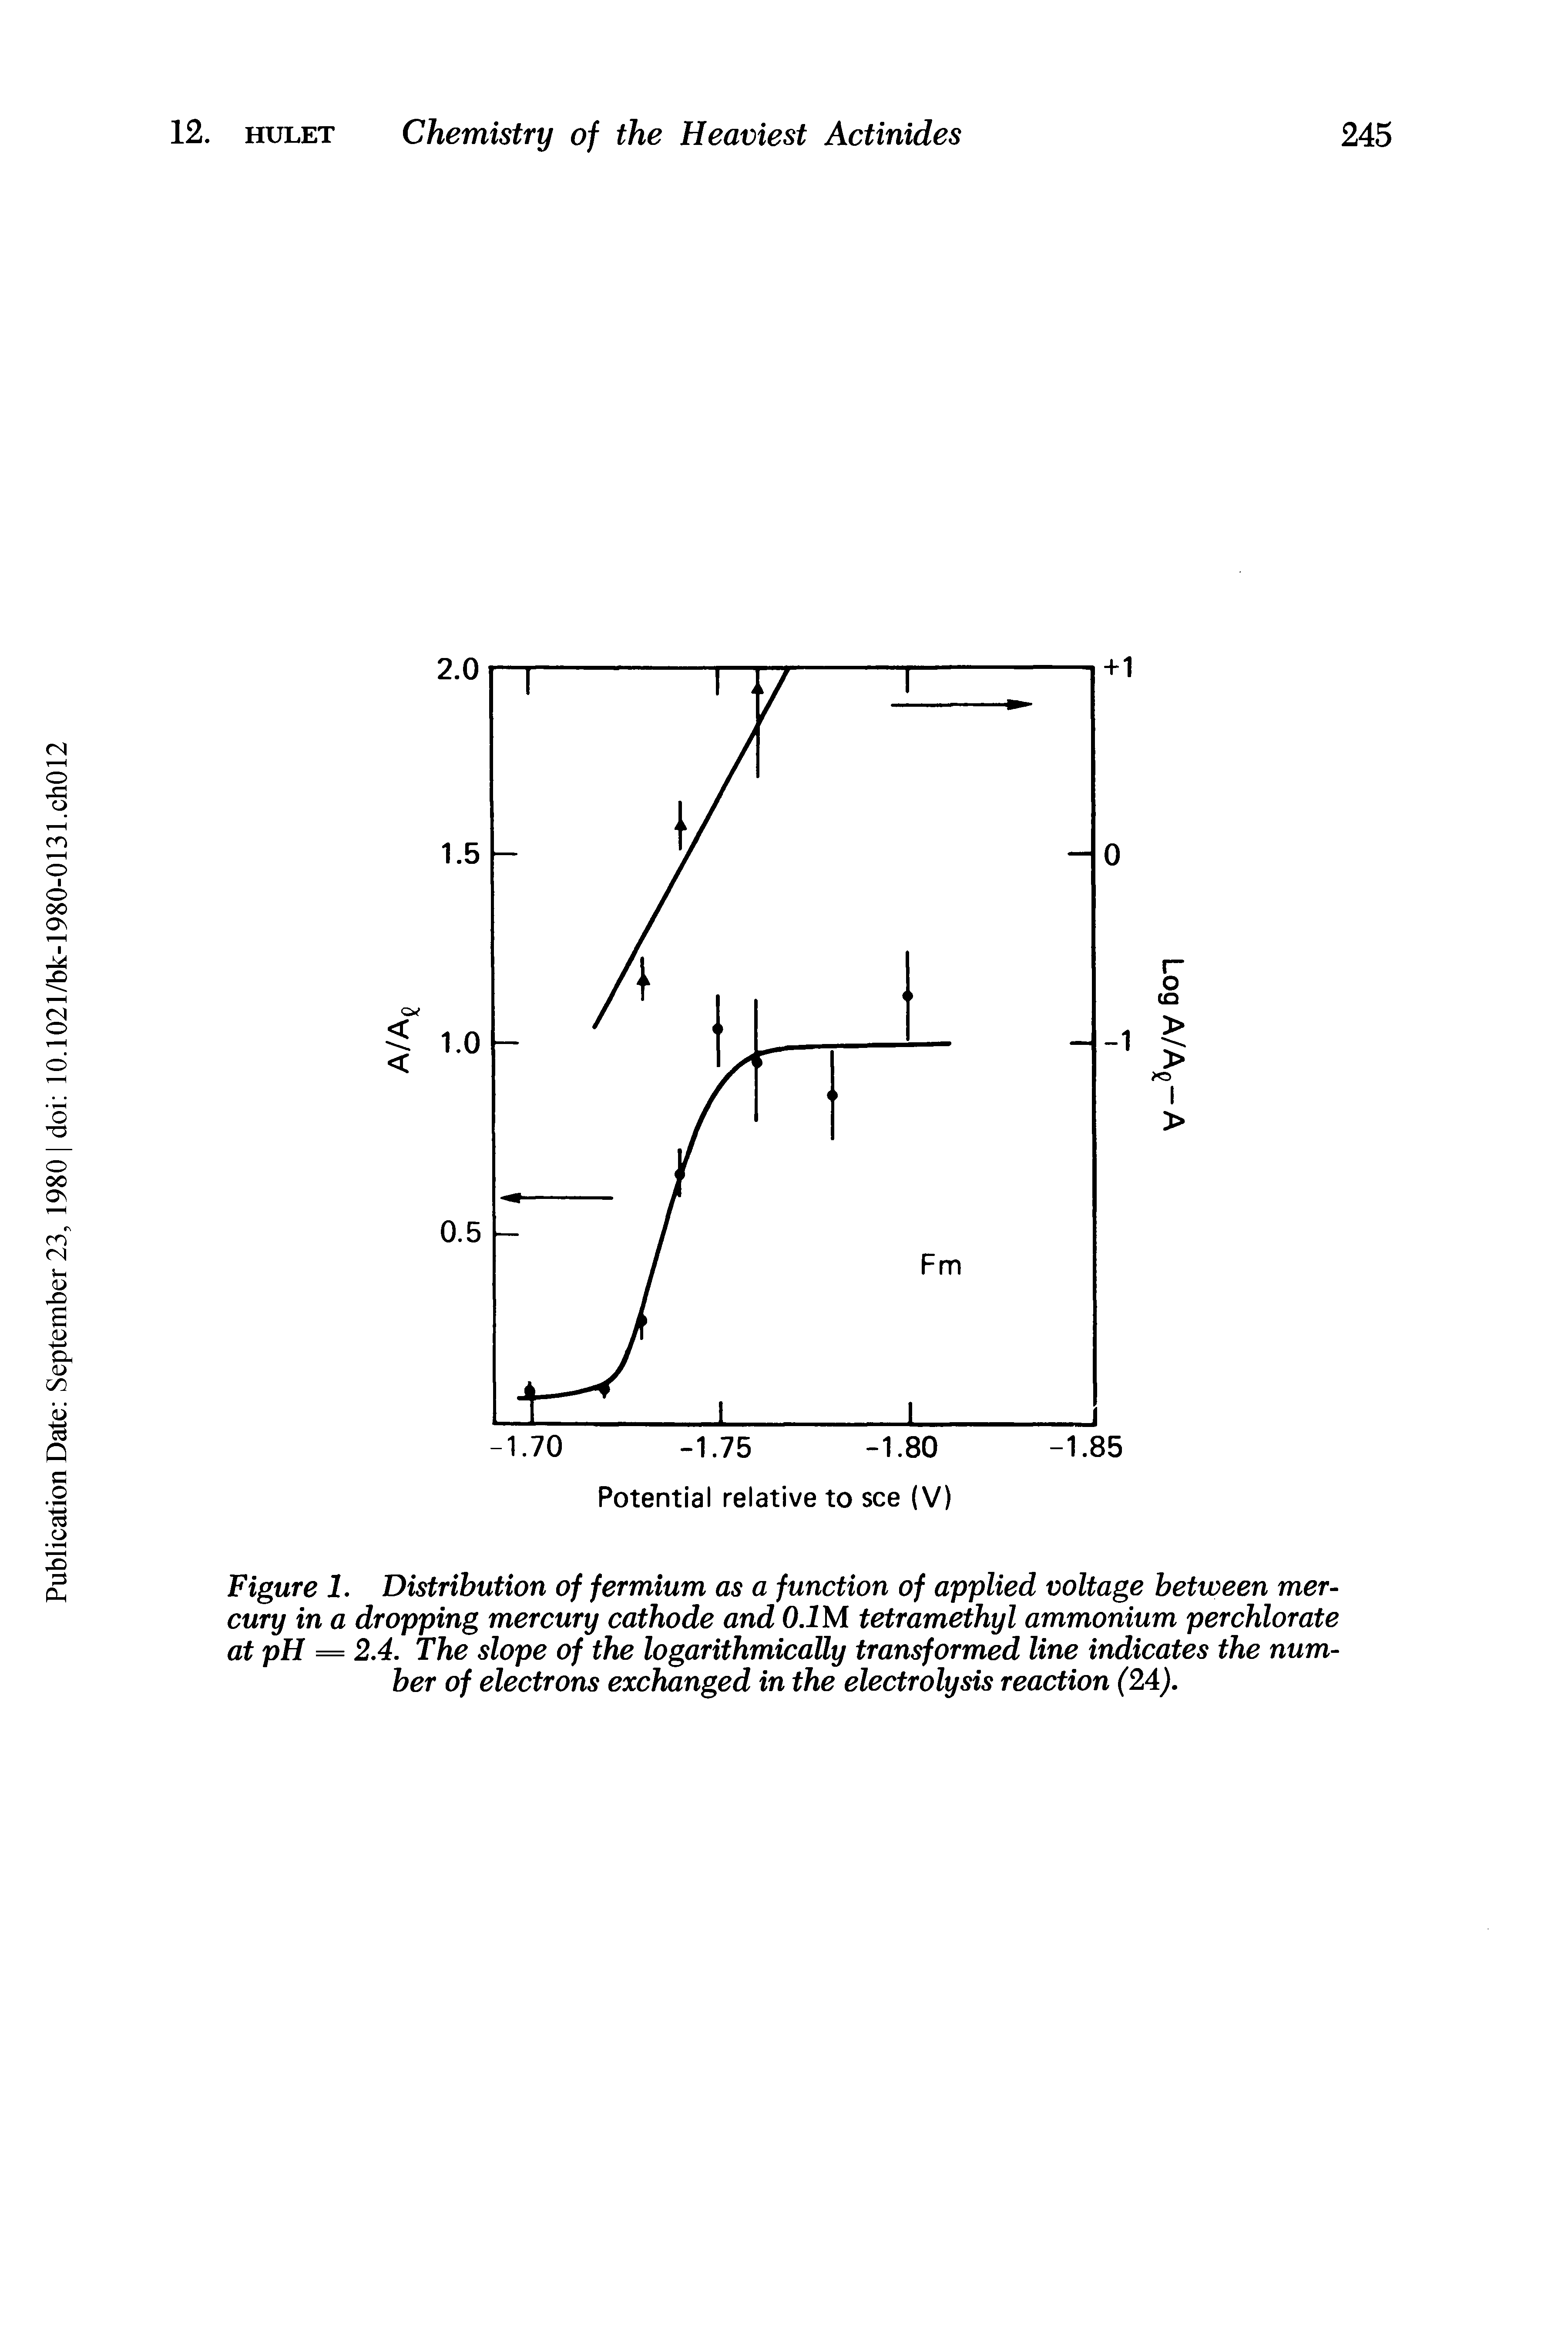 Figure 1. Distribution of fermium as a function of applied voltage between mercury in a dropping mercury cathode and 0.1M tetramethyl ammonium perchlorate at pH = 2.4. The slope of the logarithmically transformed line indicates the number of electrons exchanged in the electrolysis reaction (24).